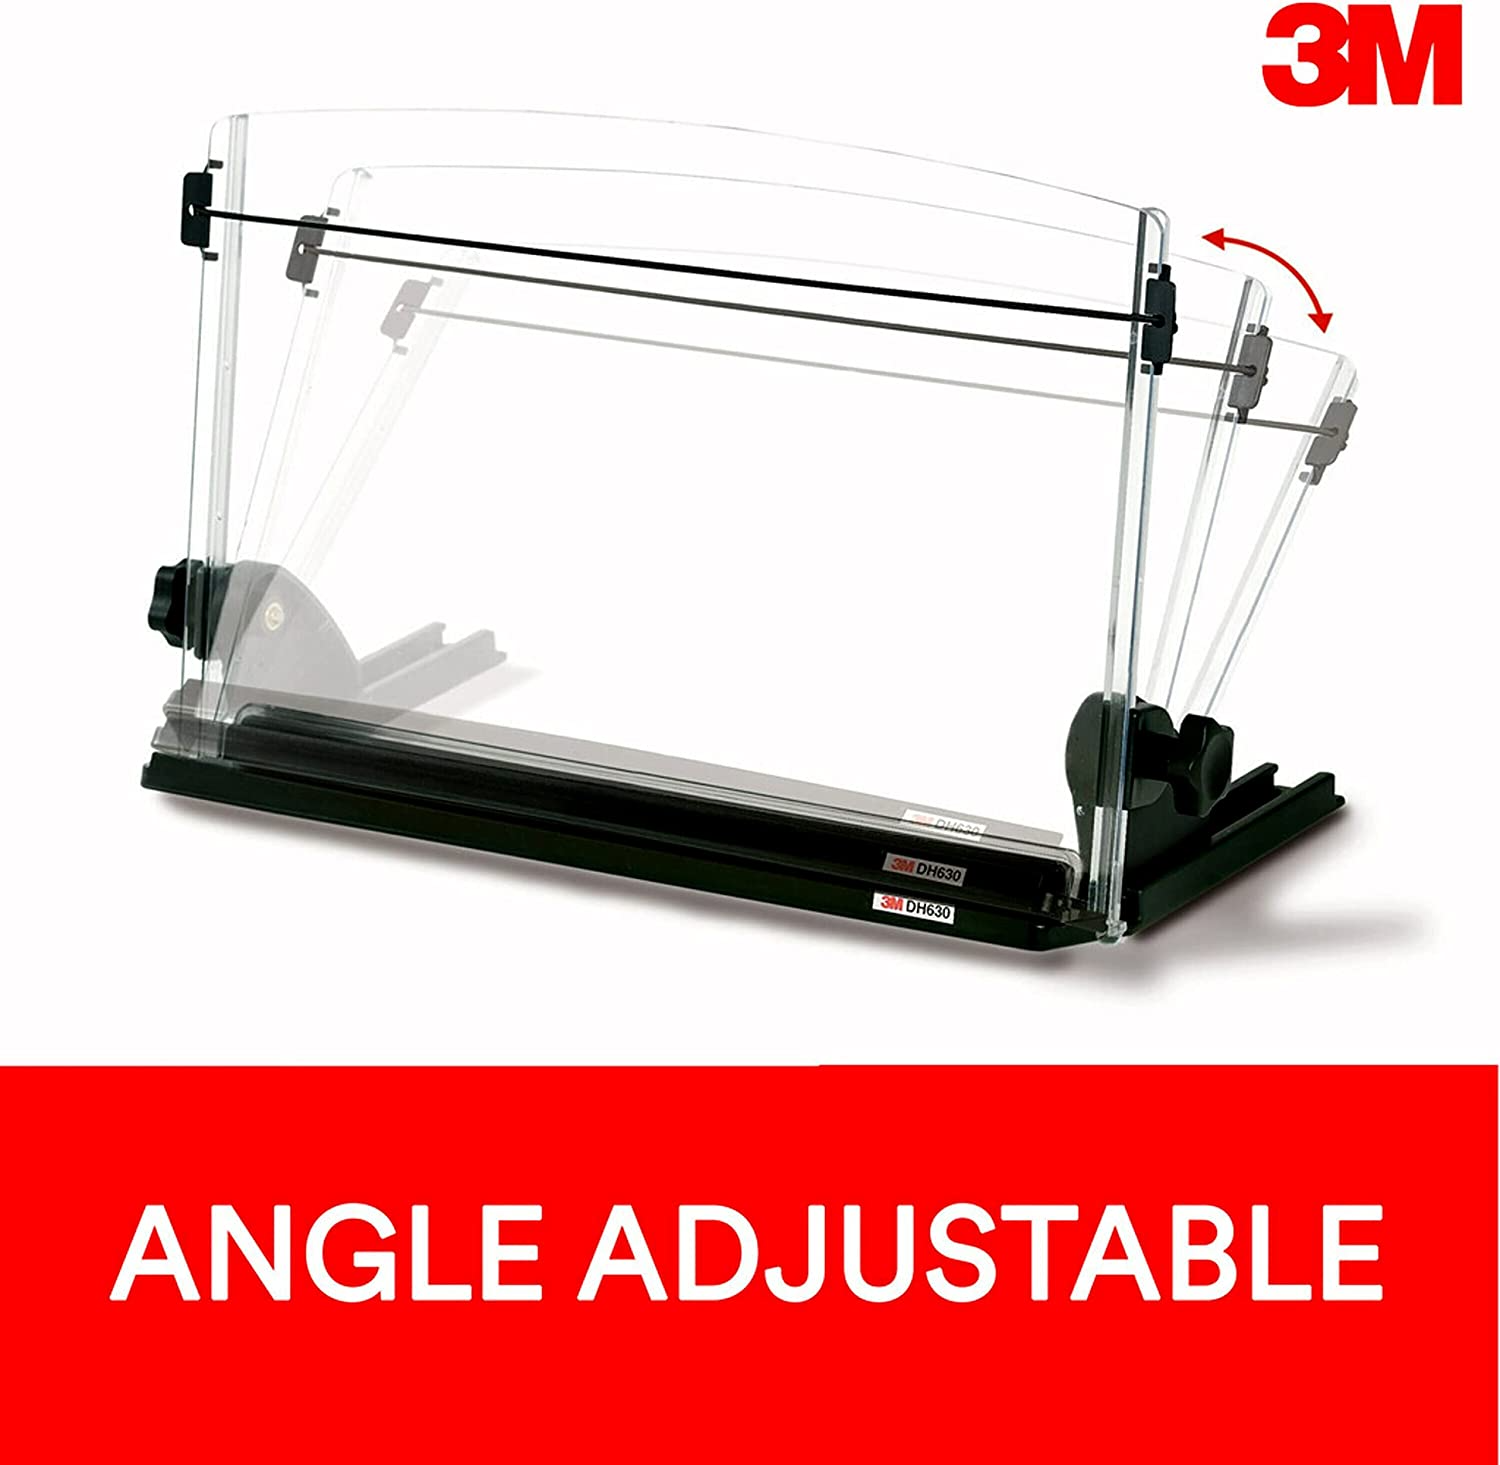 3M A4 Document Holder (DH630MB)